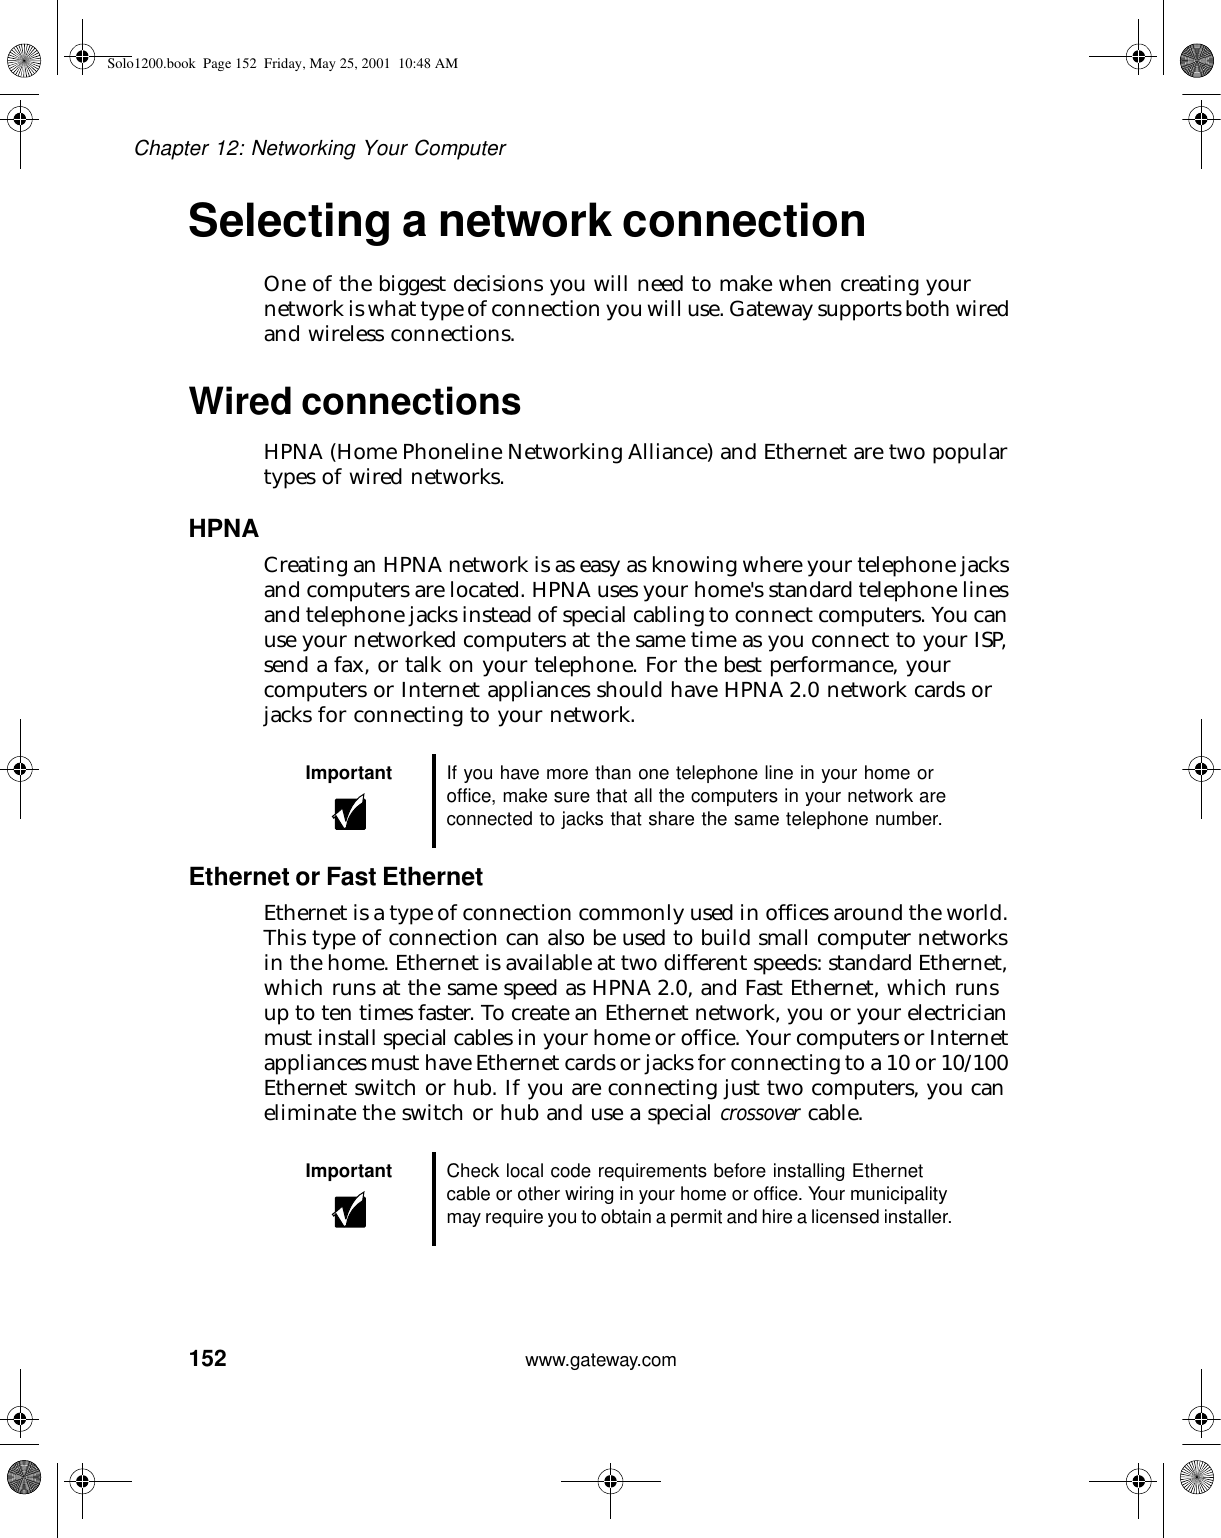 152Chapter 12: Networking Your Computerwww.gateway.comSelecting a network connectionOne of the biggest decisions you will need to make when creating your network is what type of connection you will use. Gateway supports both wired and wireless connections.Wired connectionsHPNA (Home Phoneline Networking Alliance) and Ethernet are two popular types of wired networks.HPNACreating an HPNA network is as easy as knowing where your telephone jacks and computers are located. HPNA uses your home&apos;s standard telephone lines and telephone jacks instead of special cabling to connect computers. You can use your networked computers at the same time as you connect to your ISP, send a fax, or talk on your telephone. For the best performance, your computers or Internet appliances should have HPNA 2.0 network cards or jacks for connecting to your network.Ethernet or Fast EthernetEthernet is a type of connection commonly used in offices around the world. This type of connection can also be used to build small computer networks in the home. Ethernet is available at two different speeds: standard Ethernet, which runs at the same speed as HPNA 2.0, and Fast Ethernet, which runs up to ten times faster. To create an Ethernet network, you or your electrician must install special cables in your home or office. Your computers or Internet appliances must have Ethernet cards or jacks for connecting to a 10 or 10/100 Ethernet switch or hub. If you are connecting just two computers, you can eliminate the switch or hub and use a special crossover cable.Important If you have more than one telephone line in your home or office, make sure that all the computers in your network are connected to jacks that share the same telephone number.Important Check local code requirements before installing Ethernet cable or other wiring in your home or office. Your municipality may require you to obtain a permit and hire a licensed installer.Solo1200.book Page 152 Friday, May 25, 2001 10:48 AM